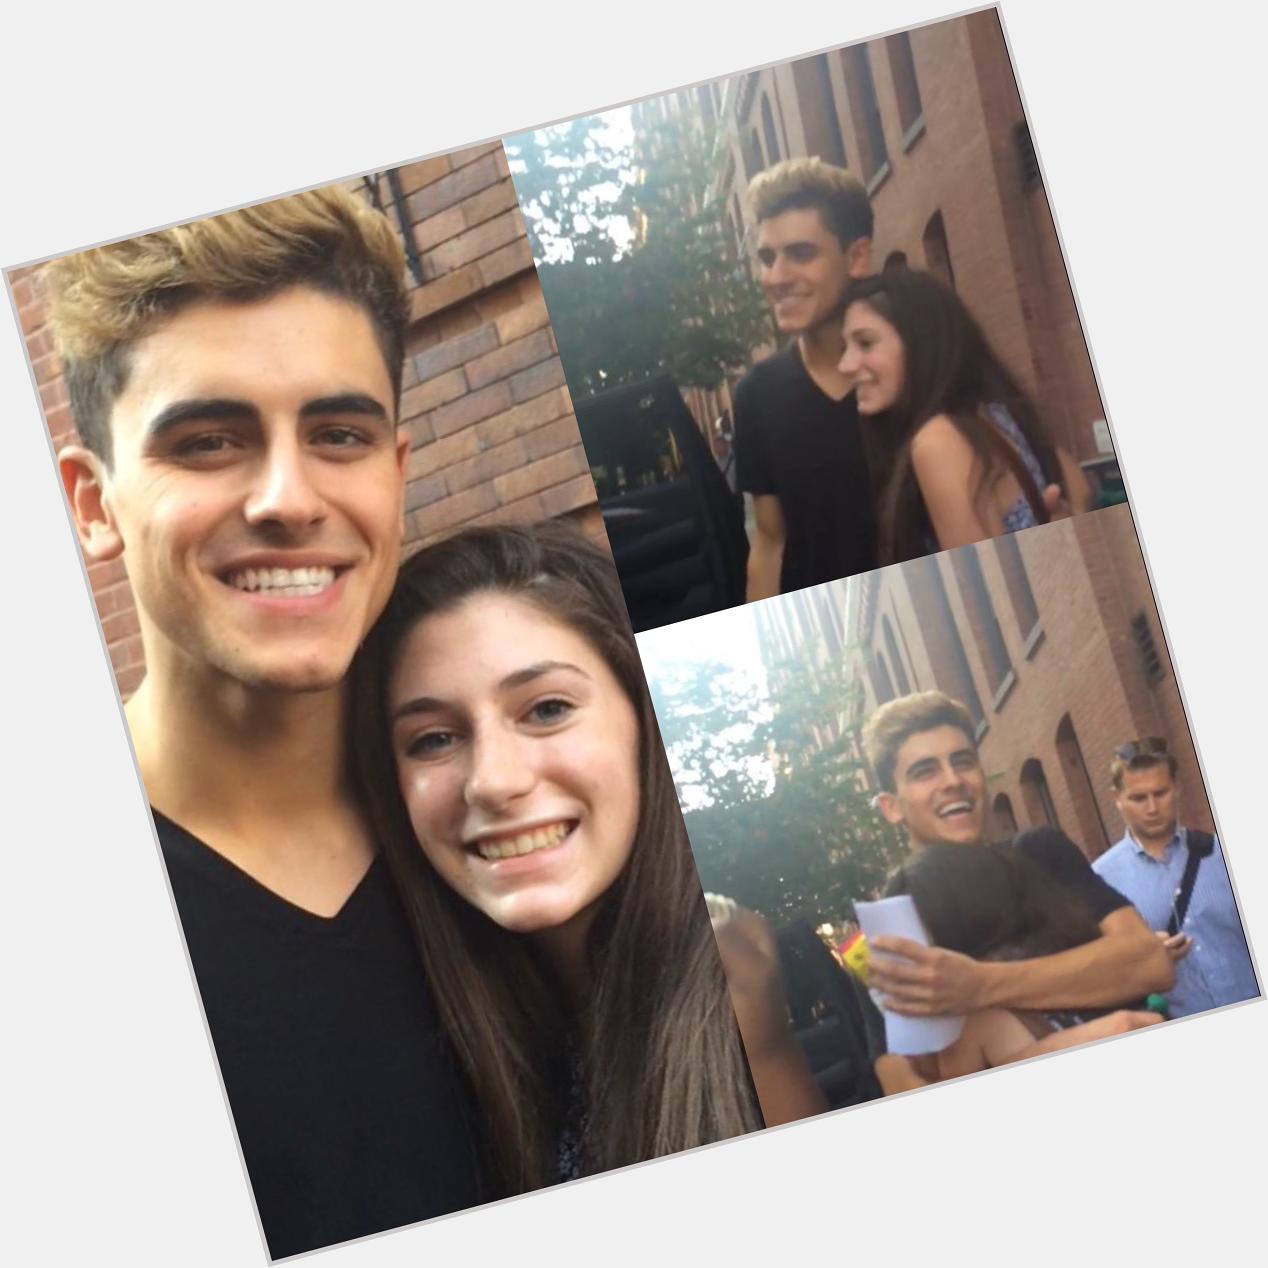 HAPPY BIRTHDAY JACK GILINSKY ur the sweetest person ever. so proud to be ur fan ily xoxo   